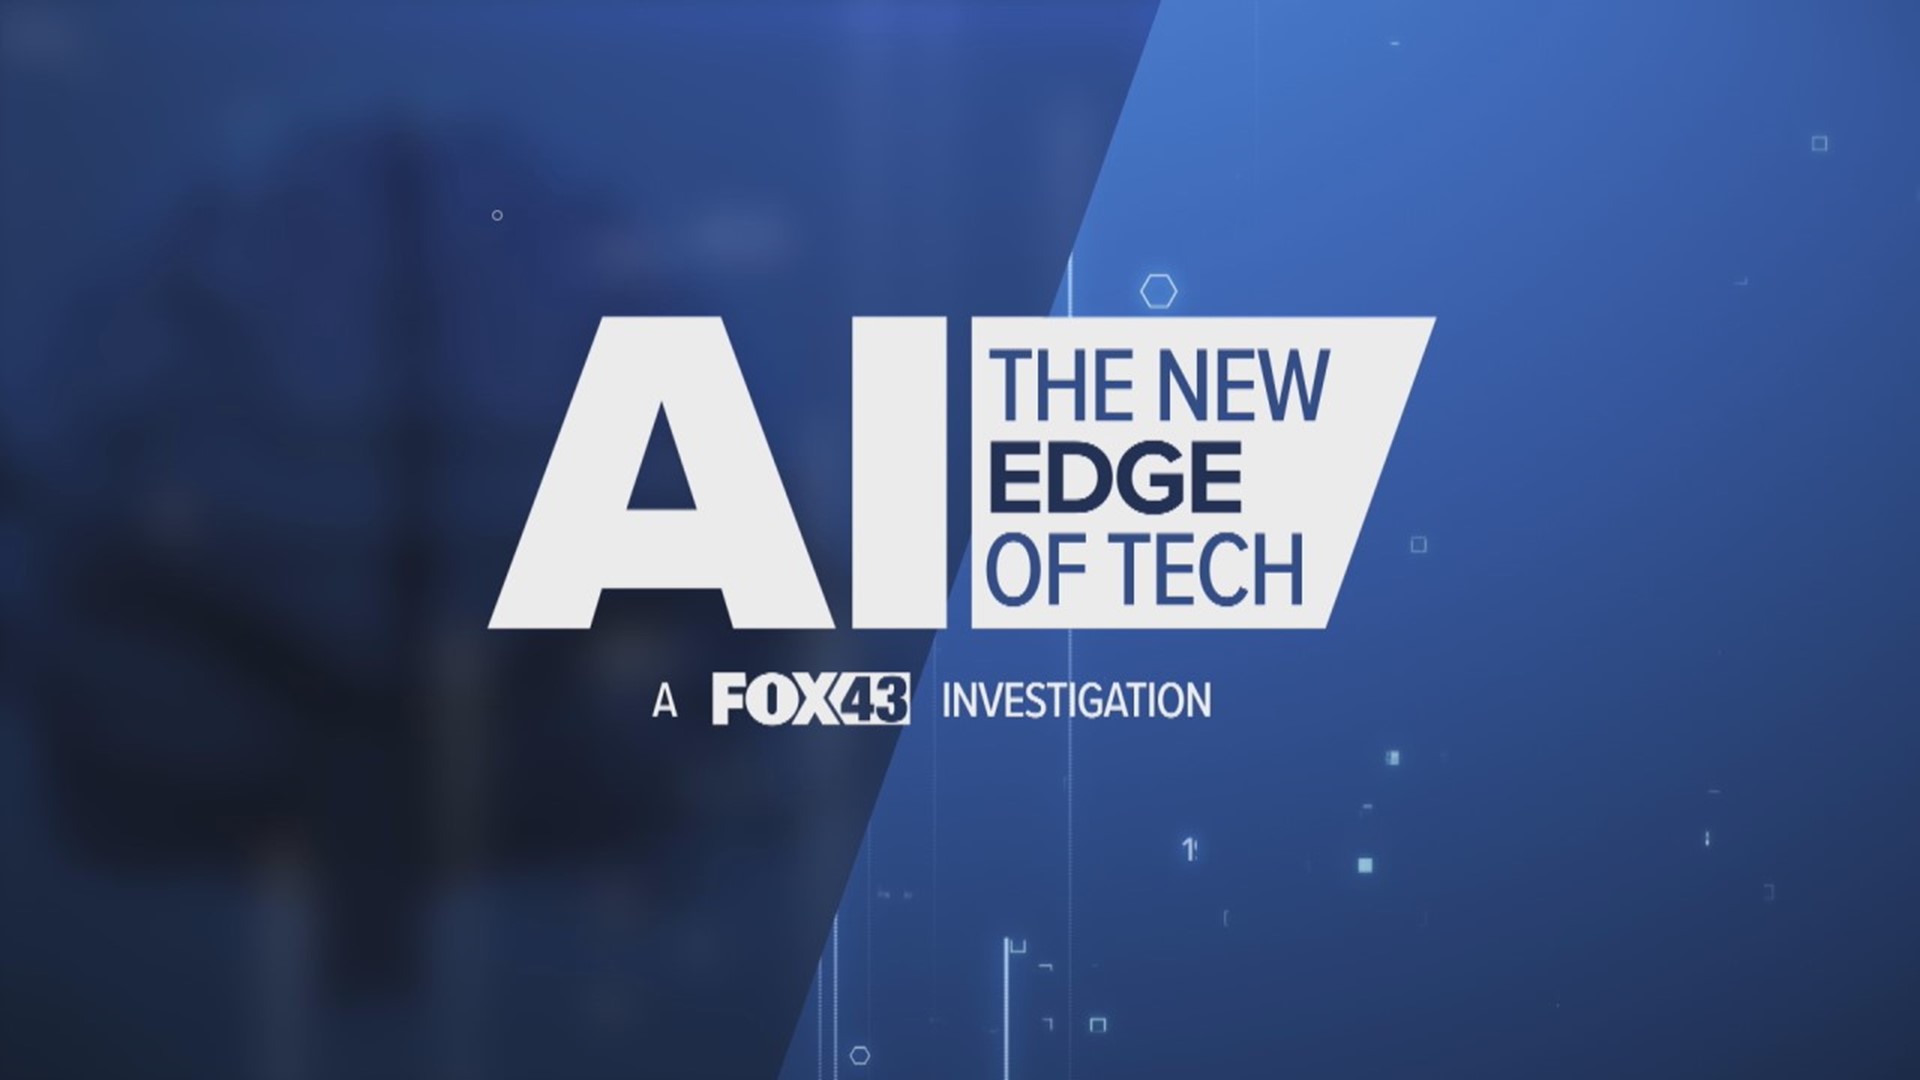 More companies are using A.I. to increase efficiency and cut costs. FOX43 examines what it means for Pa. businesses and how A.I. impact could change human roles.